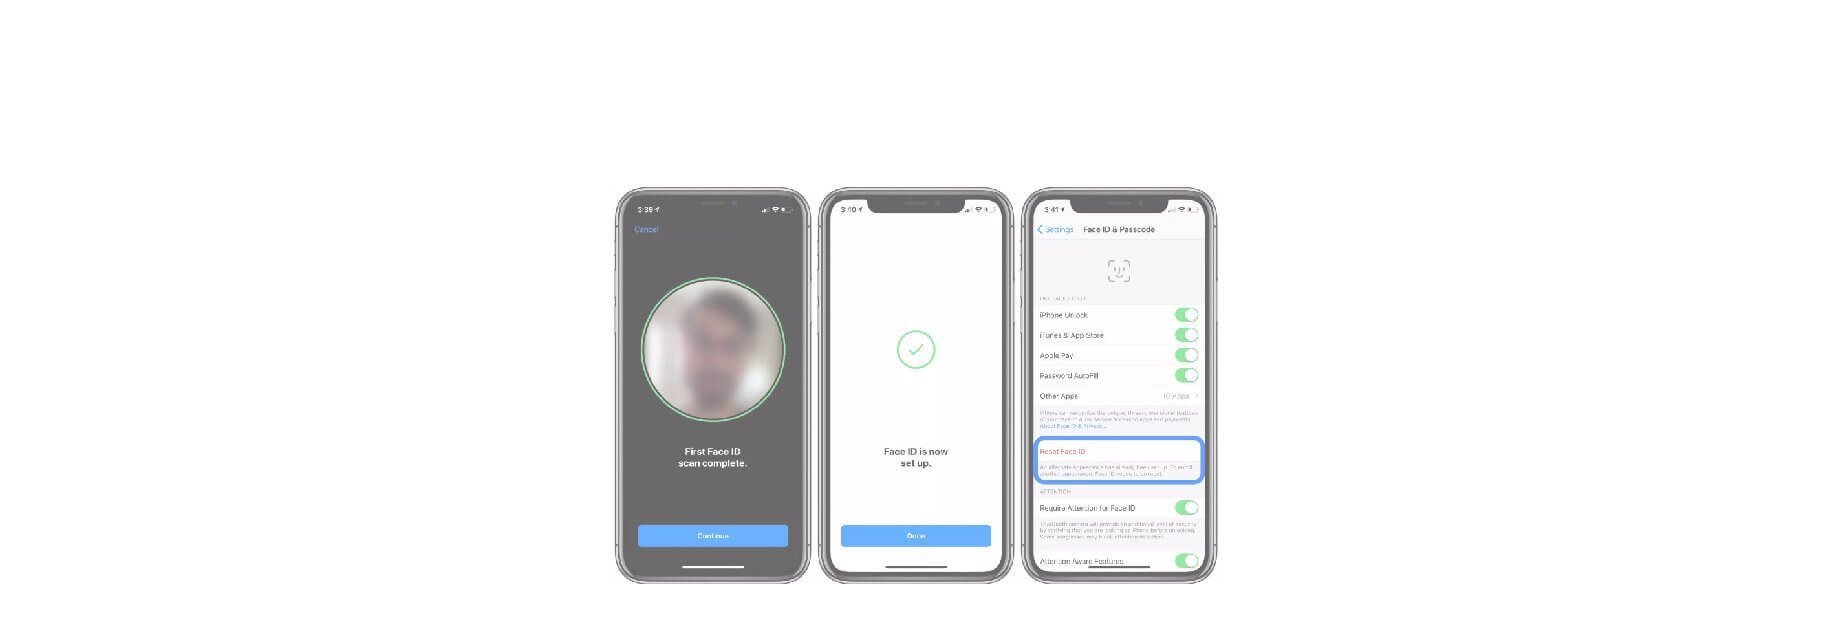 Face ID. Your face is your password.